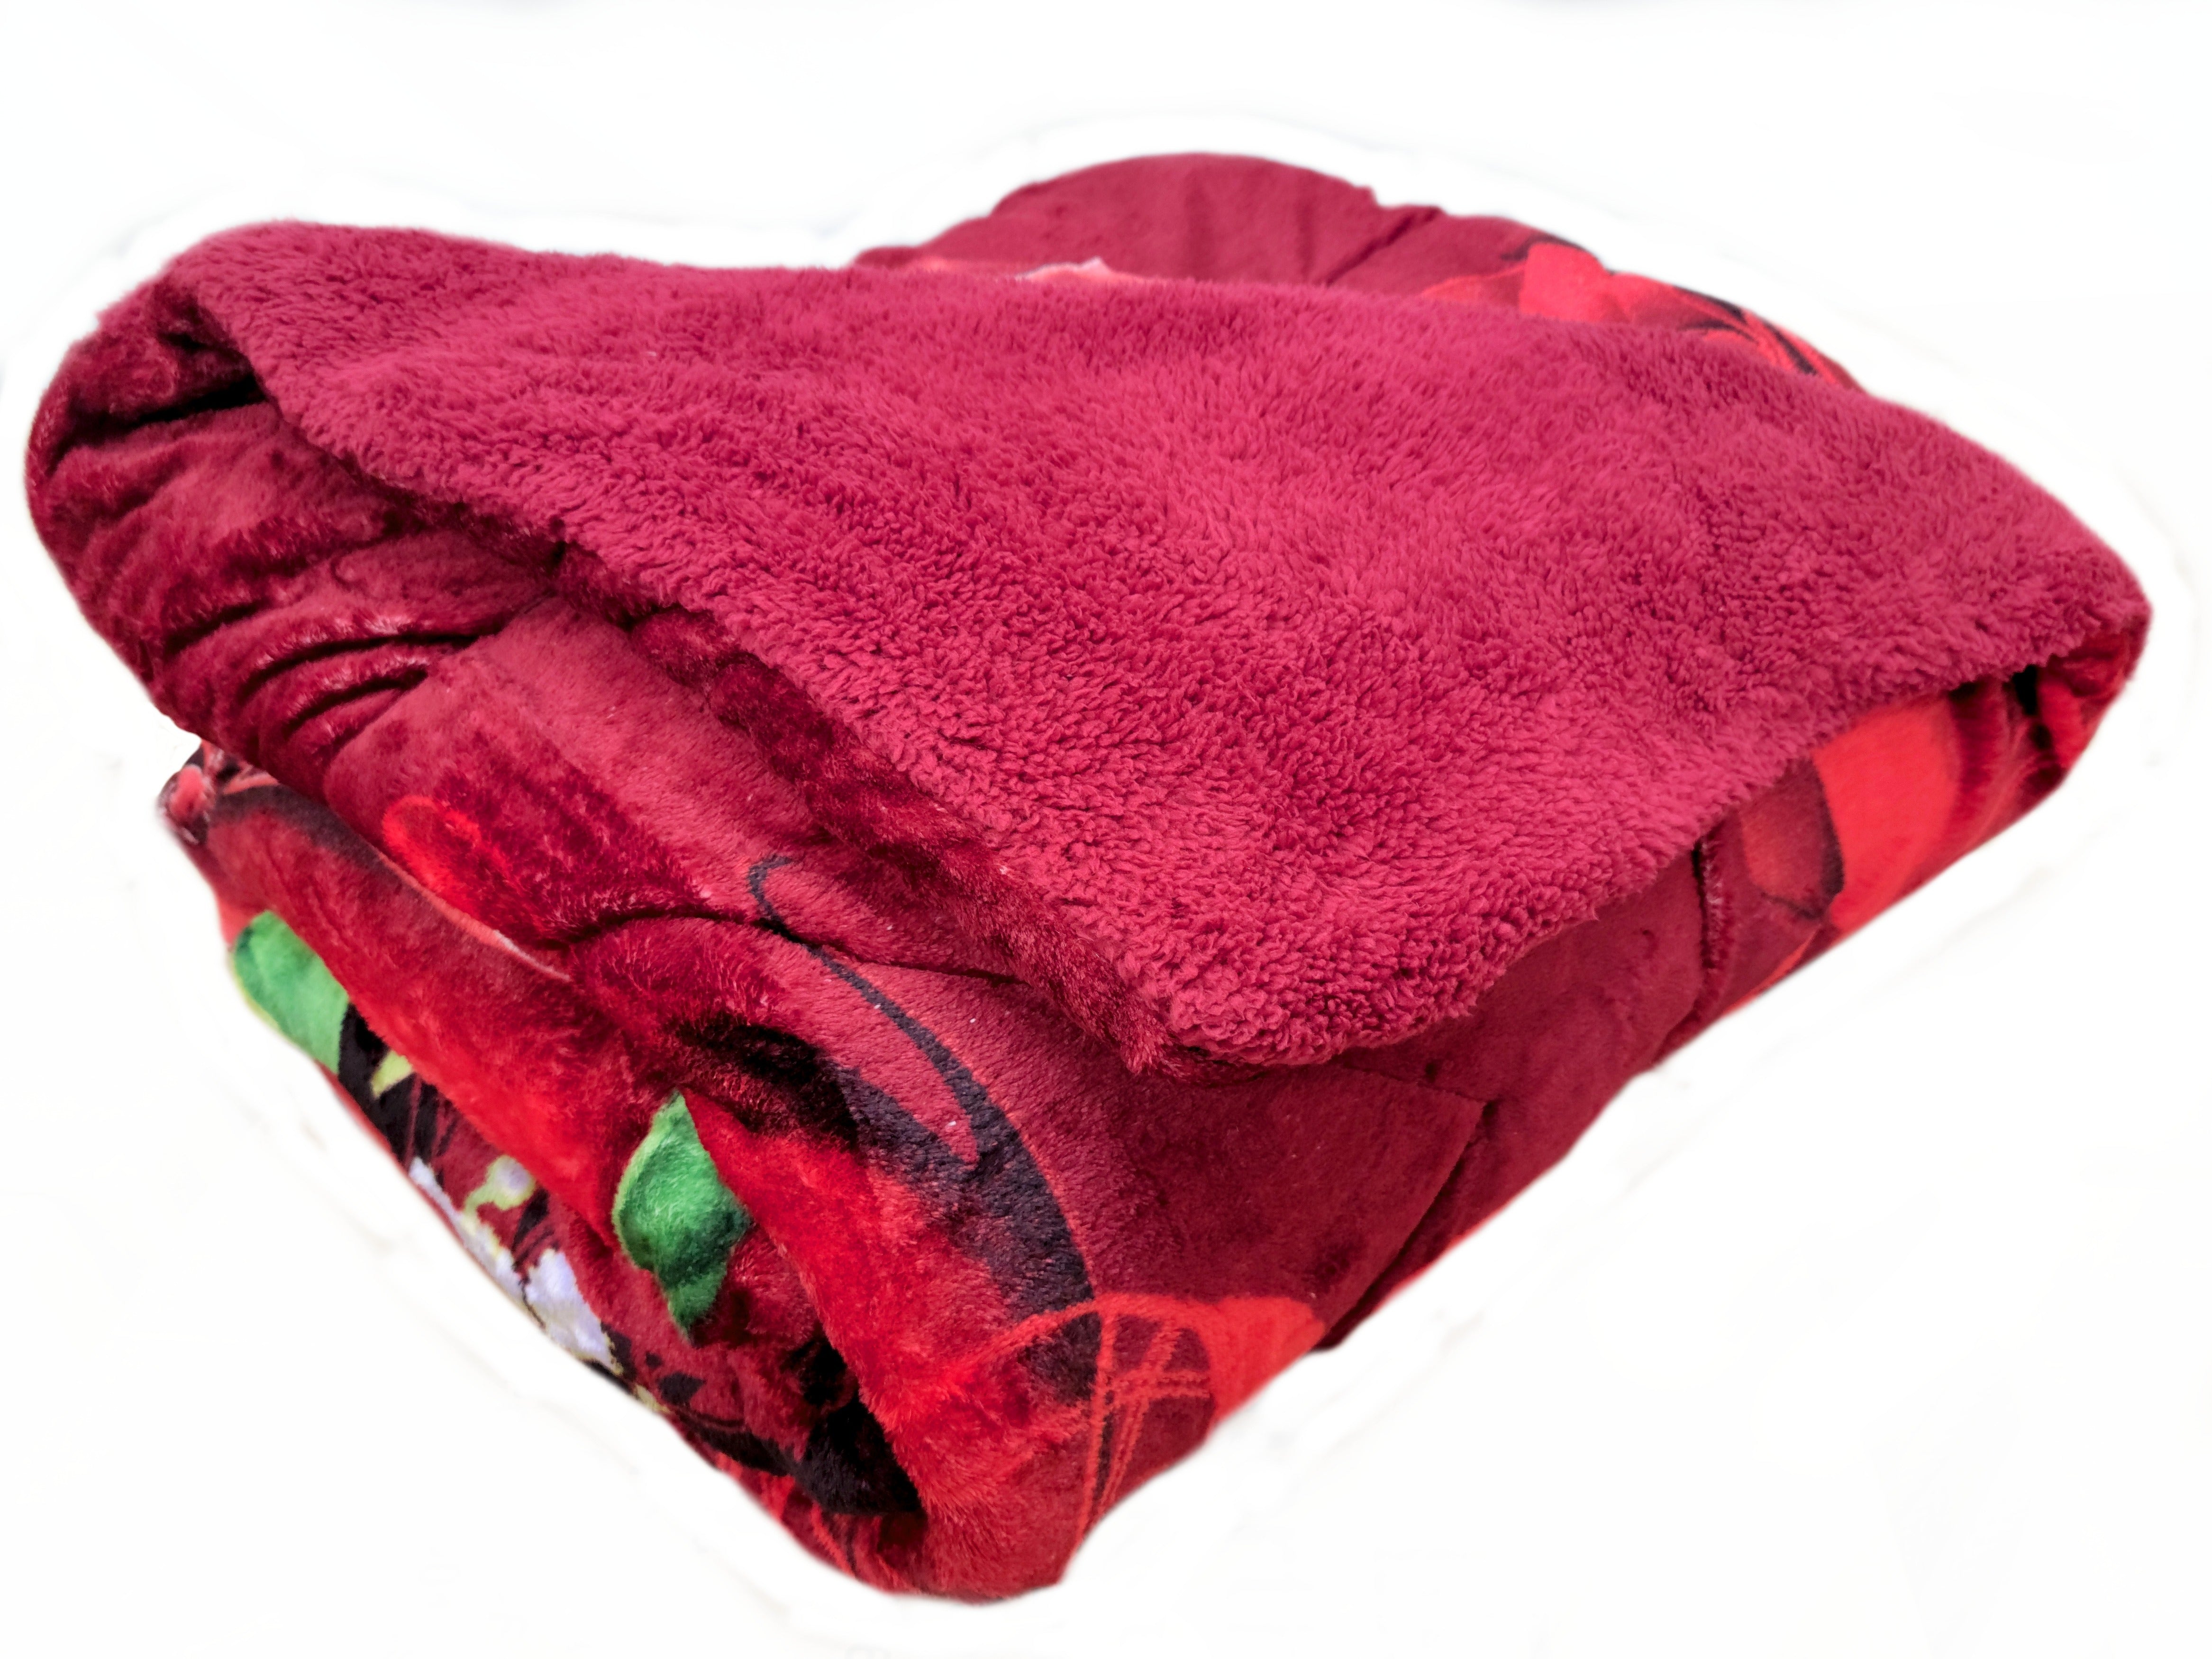 OSAKA 3PC RED ROSE FLEECE BORREGO BLANKET DOUBLE PLY BLANKET - SUPER SOFT WARM - THICK AND HEAVY PLUSH BLANKET - WITH 2 PILLOW SHAM